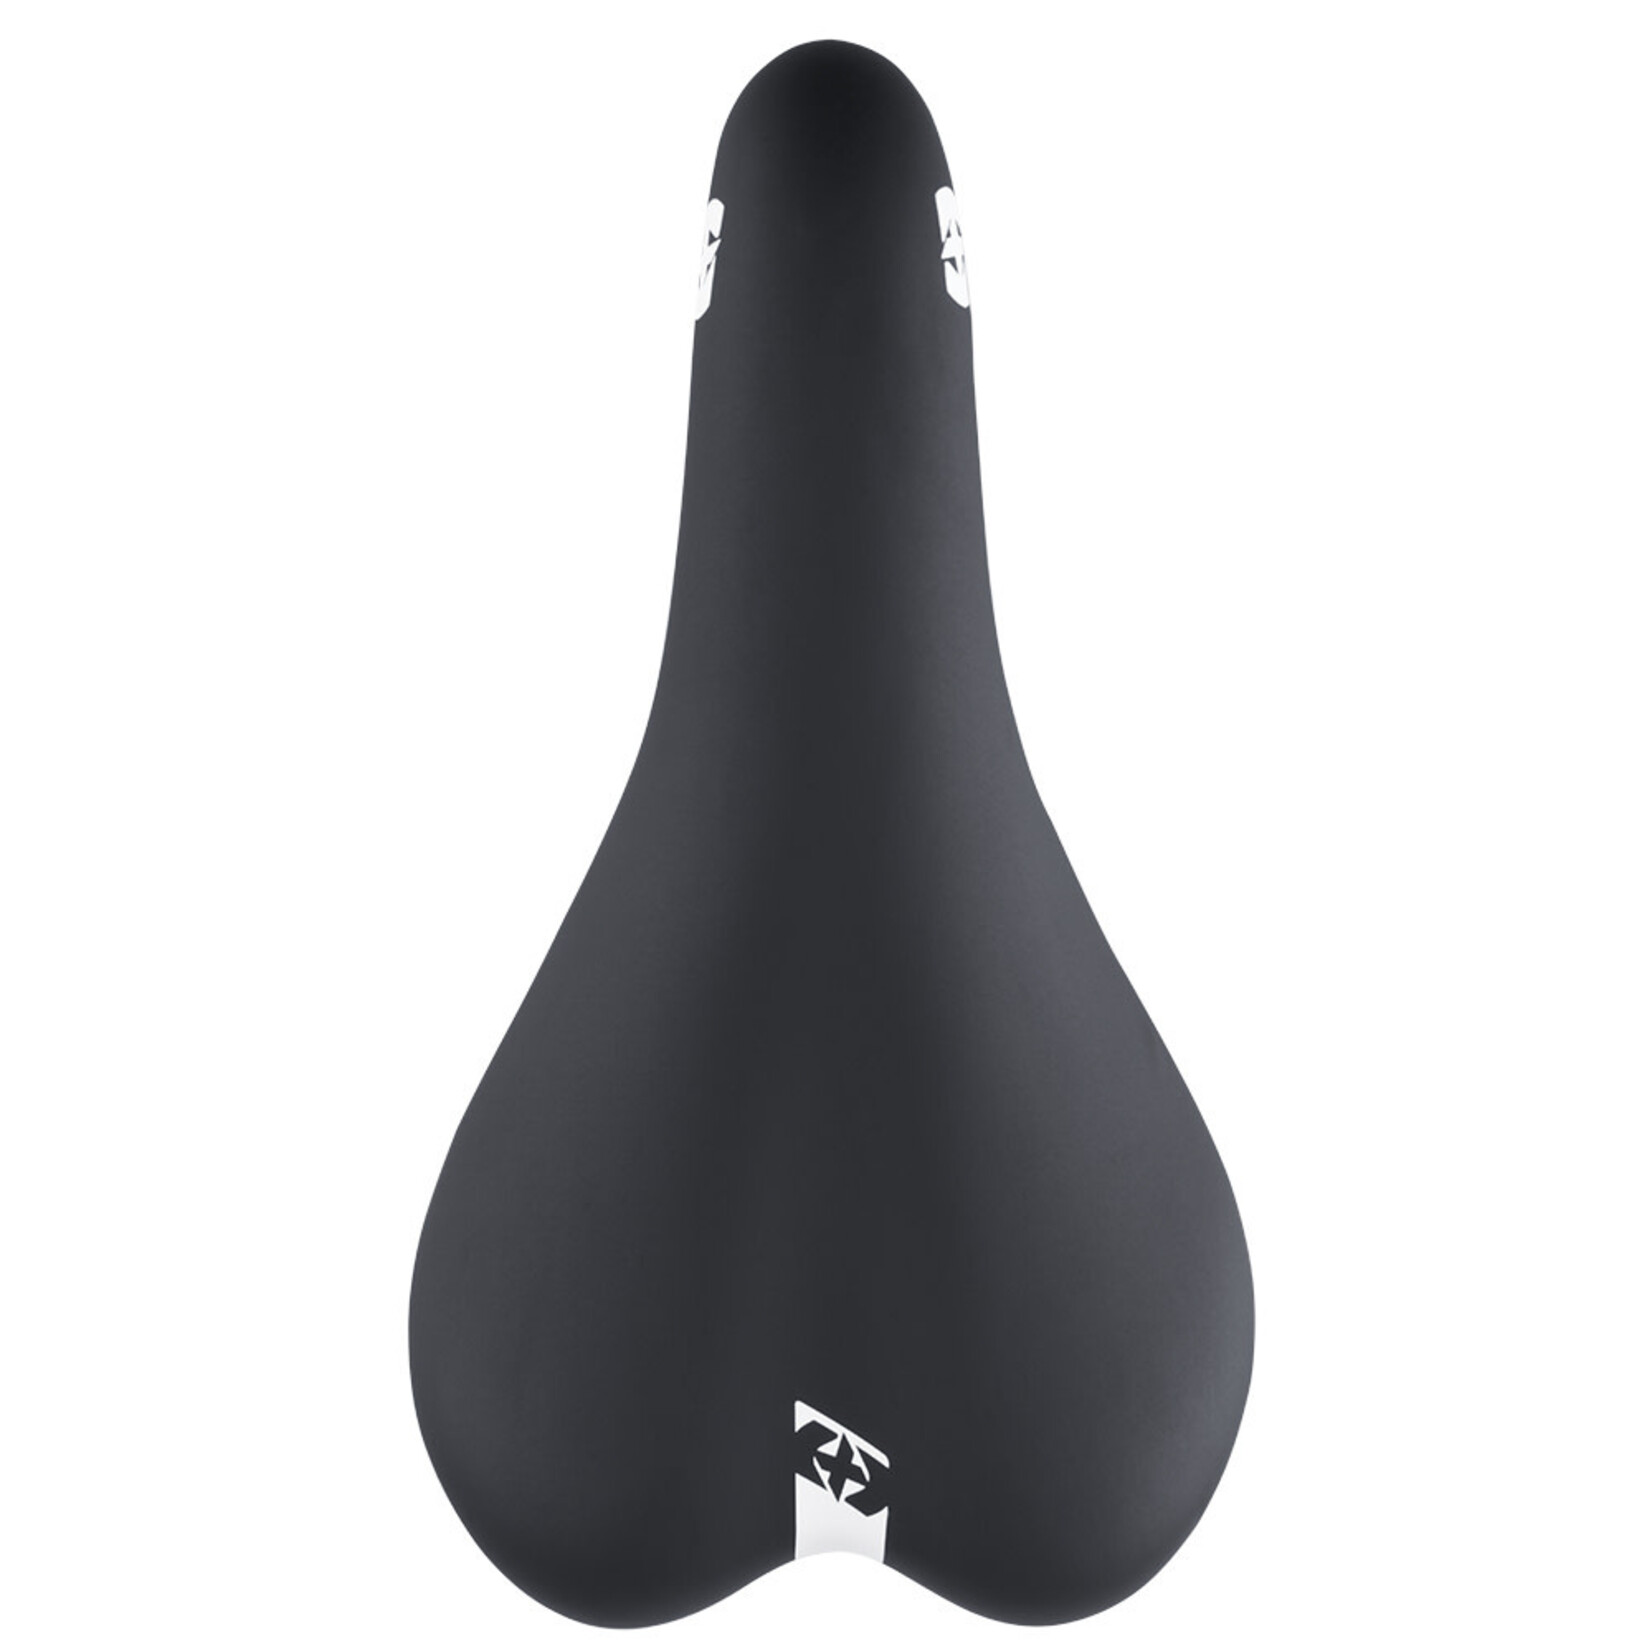 Oxford Oxford Youth Saddle 235 x 125mm